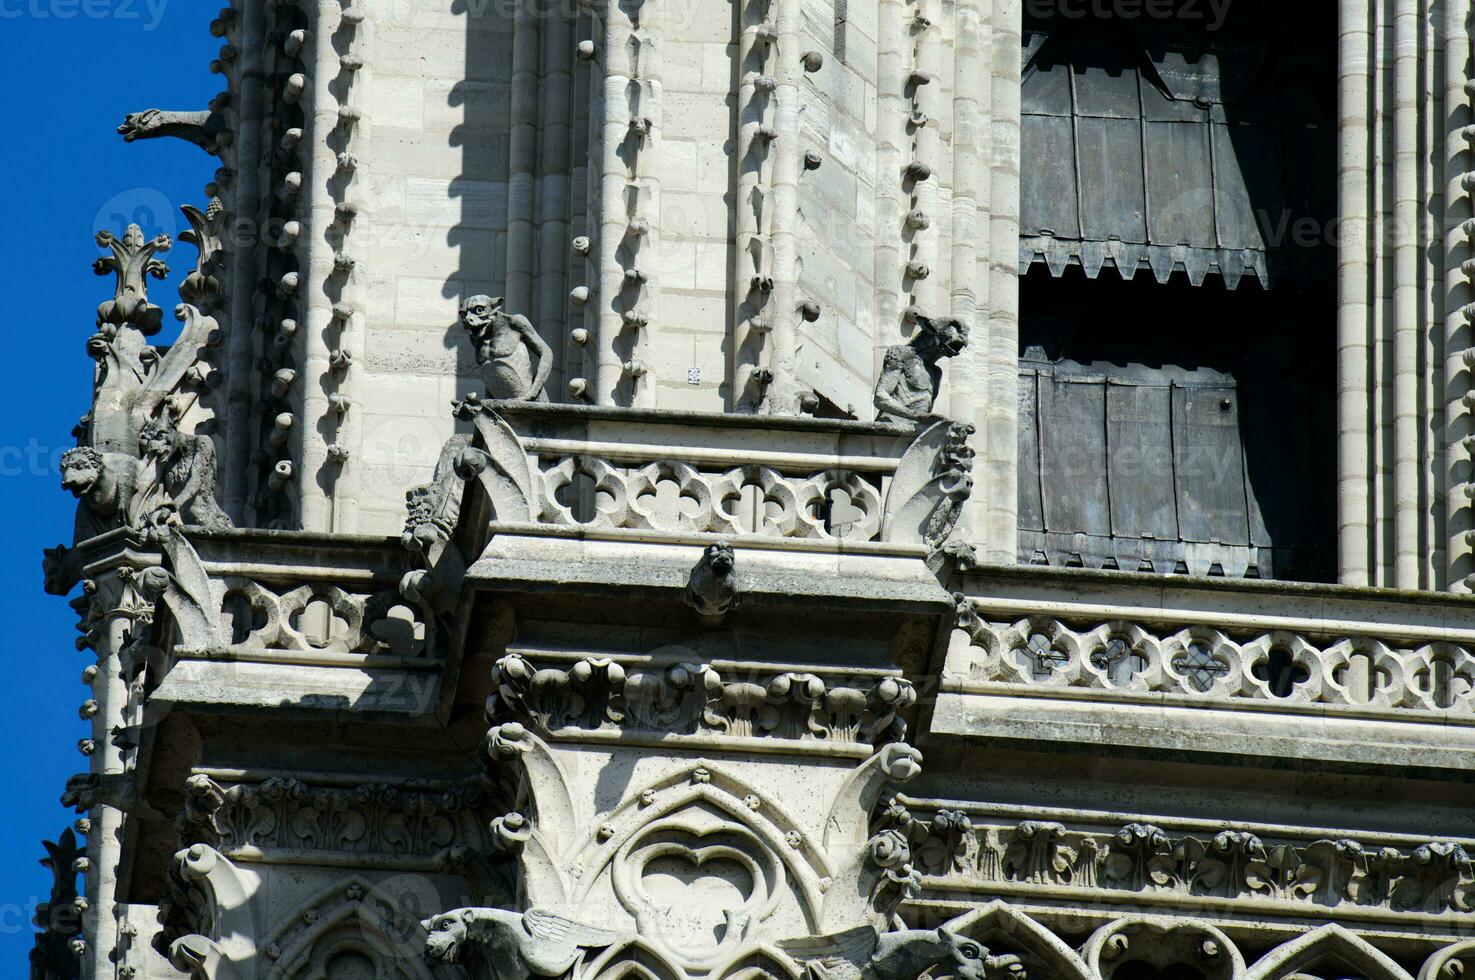 The amazing gargoyles of Notre Dame de Paris in France. A Gothic building constructed during Medieval times, is home to a number of sculptures, including many gargoyles. photo